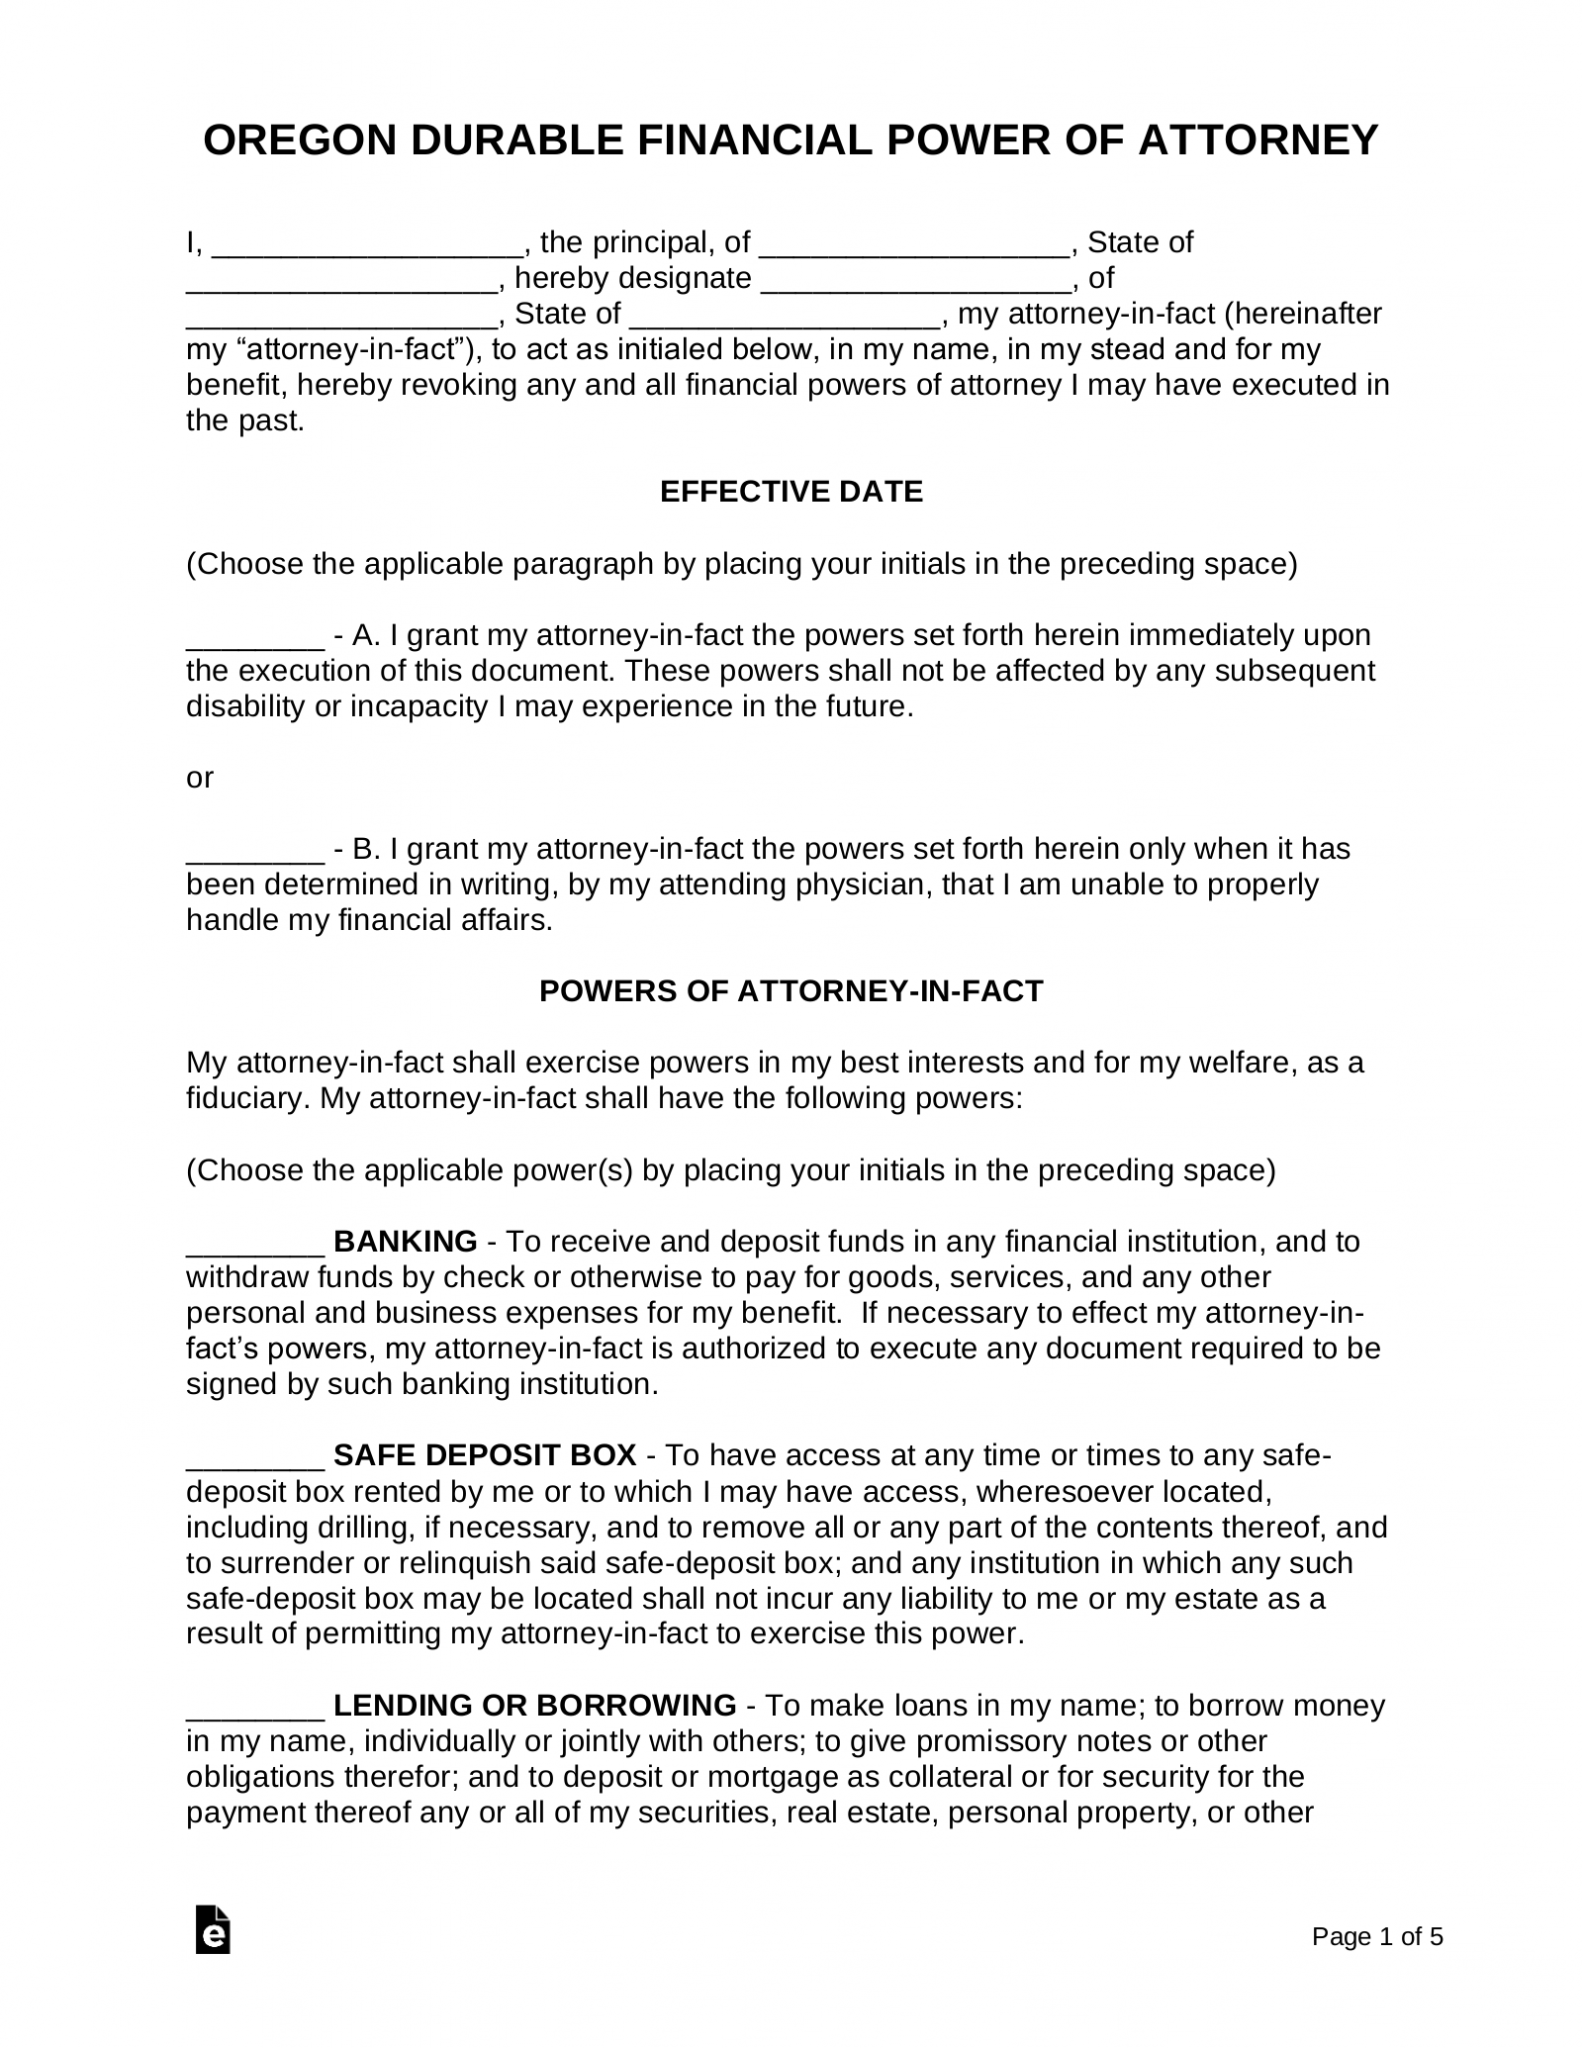 free-oregon-power-of-attorney-forms-9-types-pdf-word-eforms